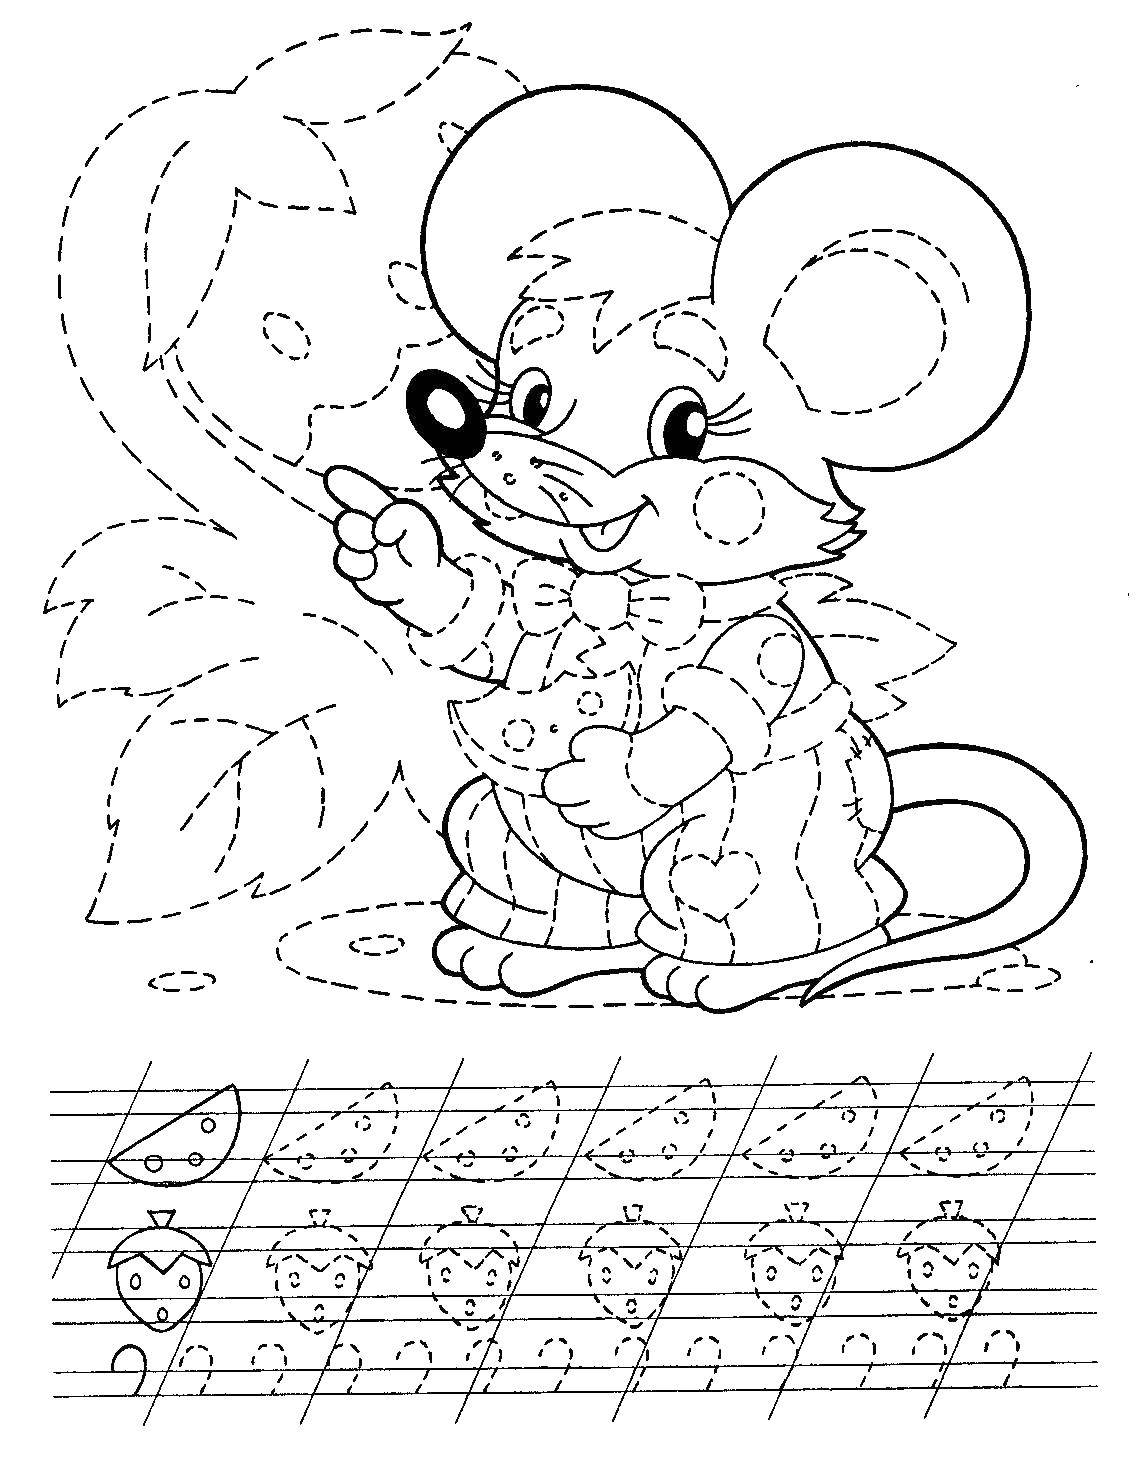 Coloring The thing with the mouse. Category school. Tags:  mouse, strawberry, cheese, recipe.